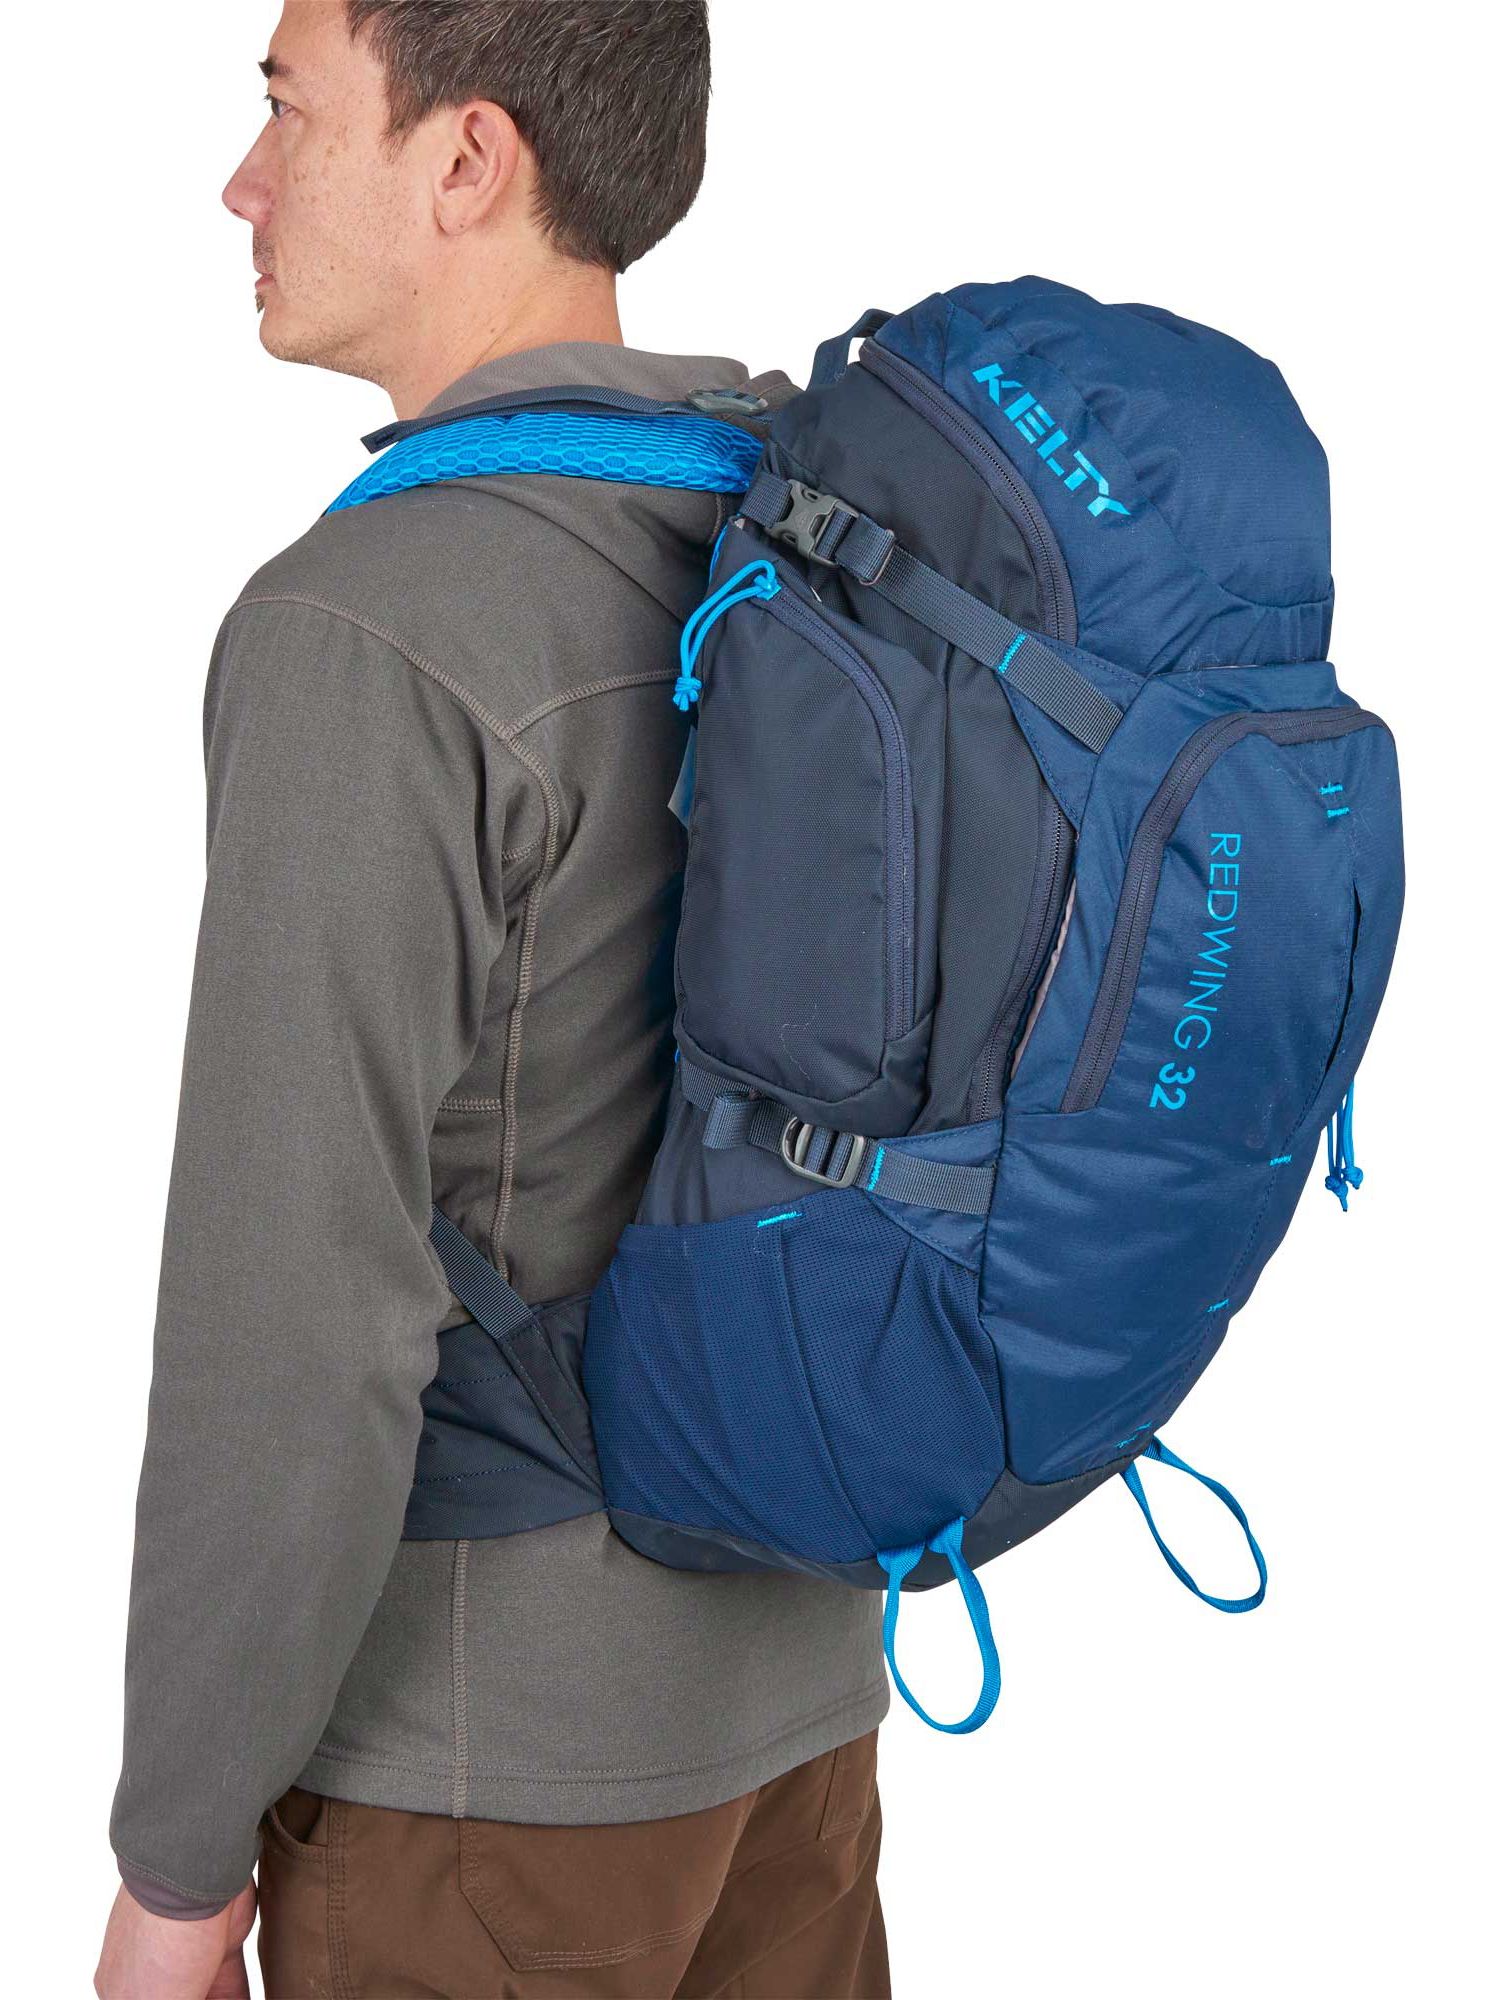 Kelty Redwing 32 Daypack